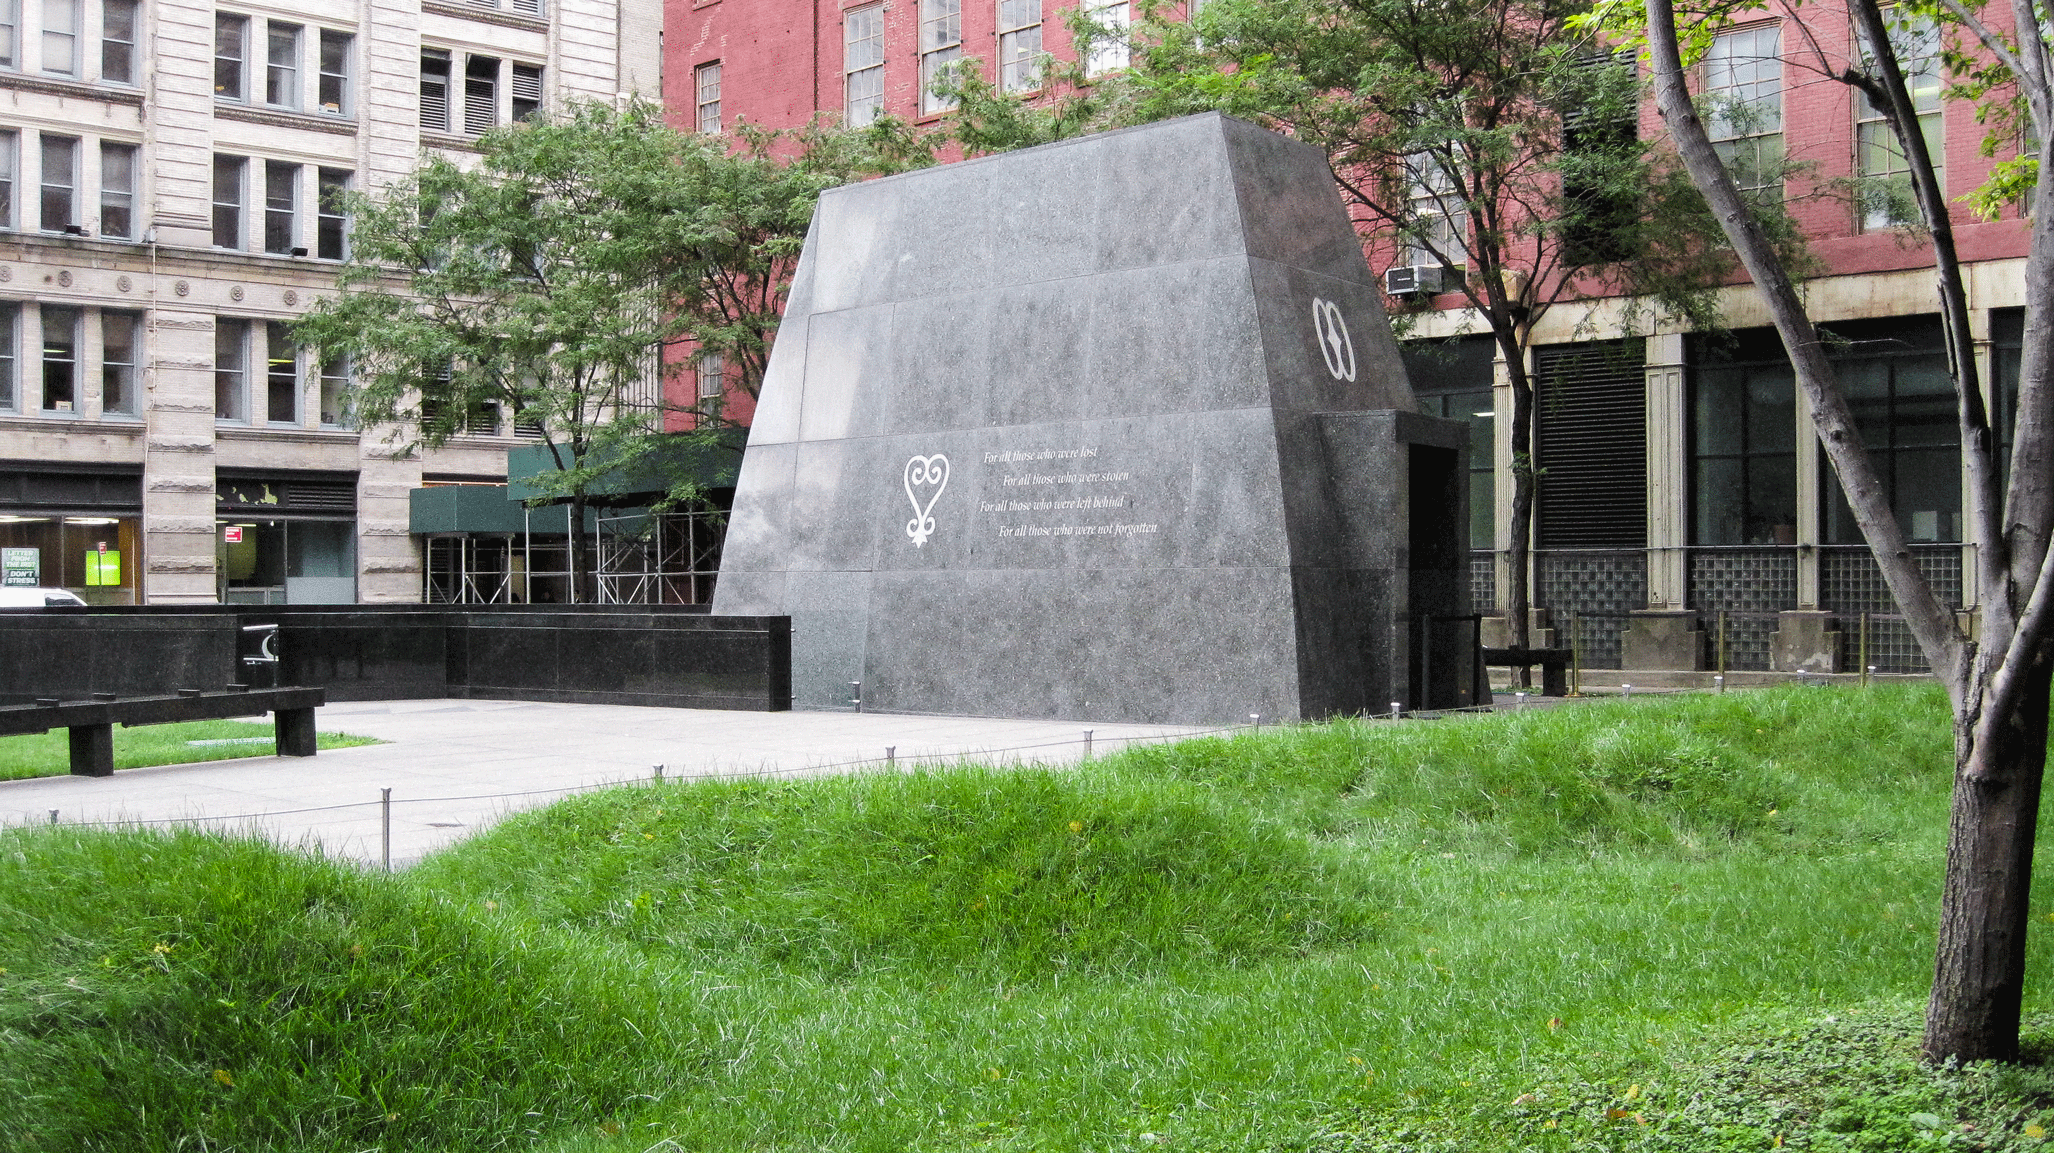 African Burial Ground New York N.Y. 2016. Photo ©Jacquelyn Walsh courtesy The Cultural Landscape Foundation